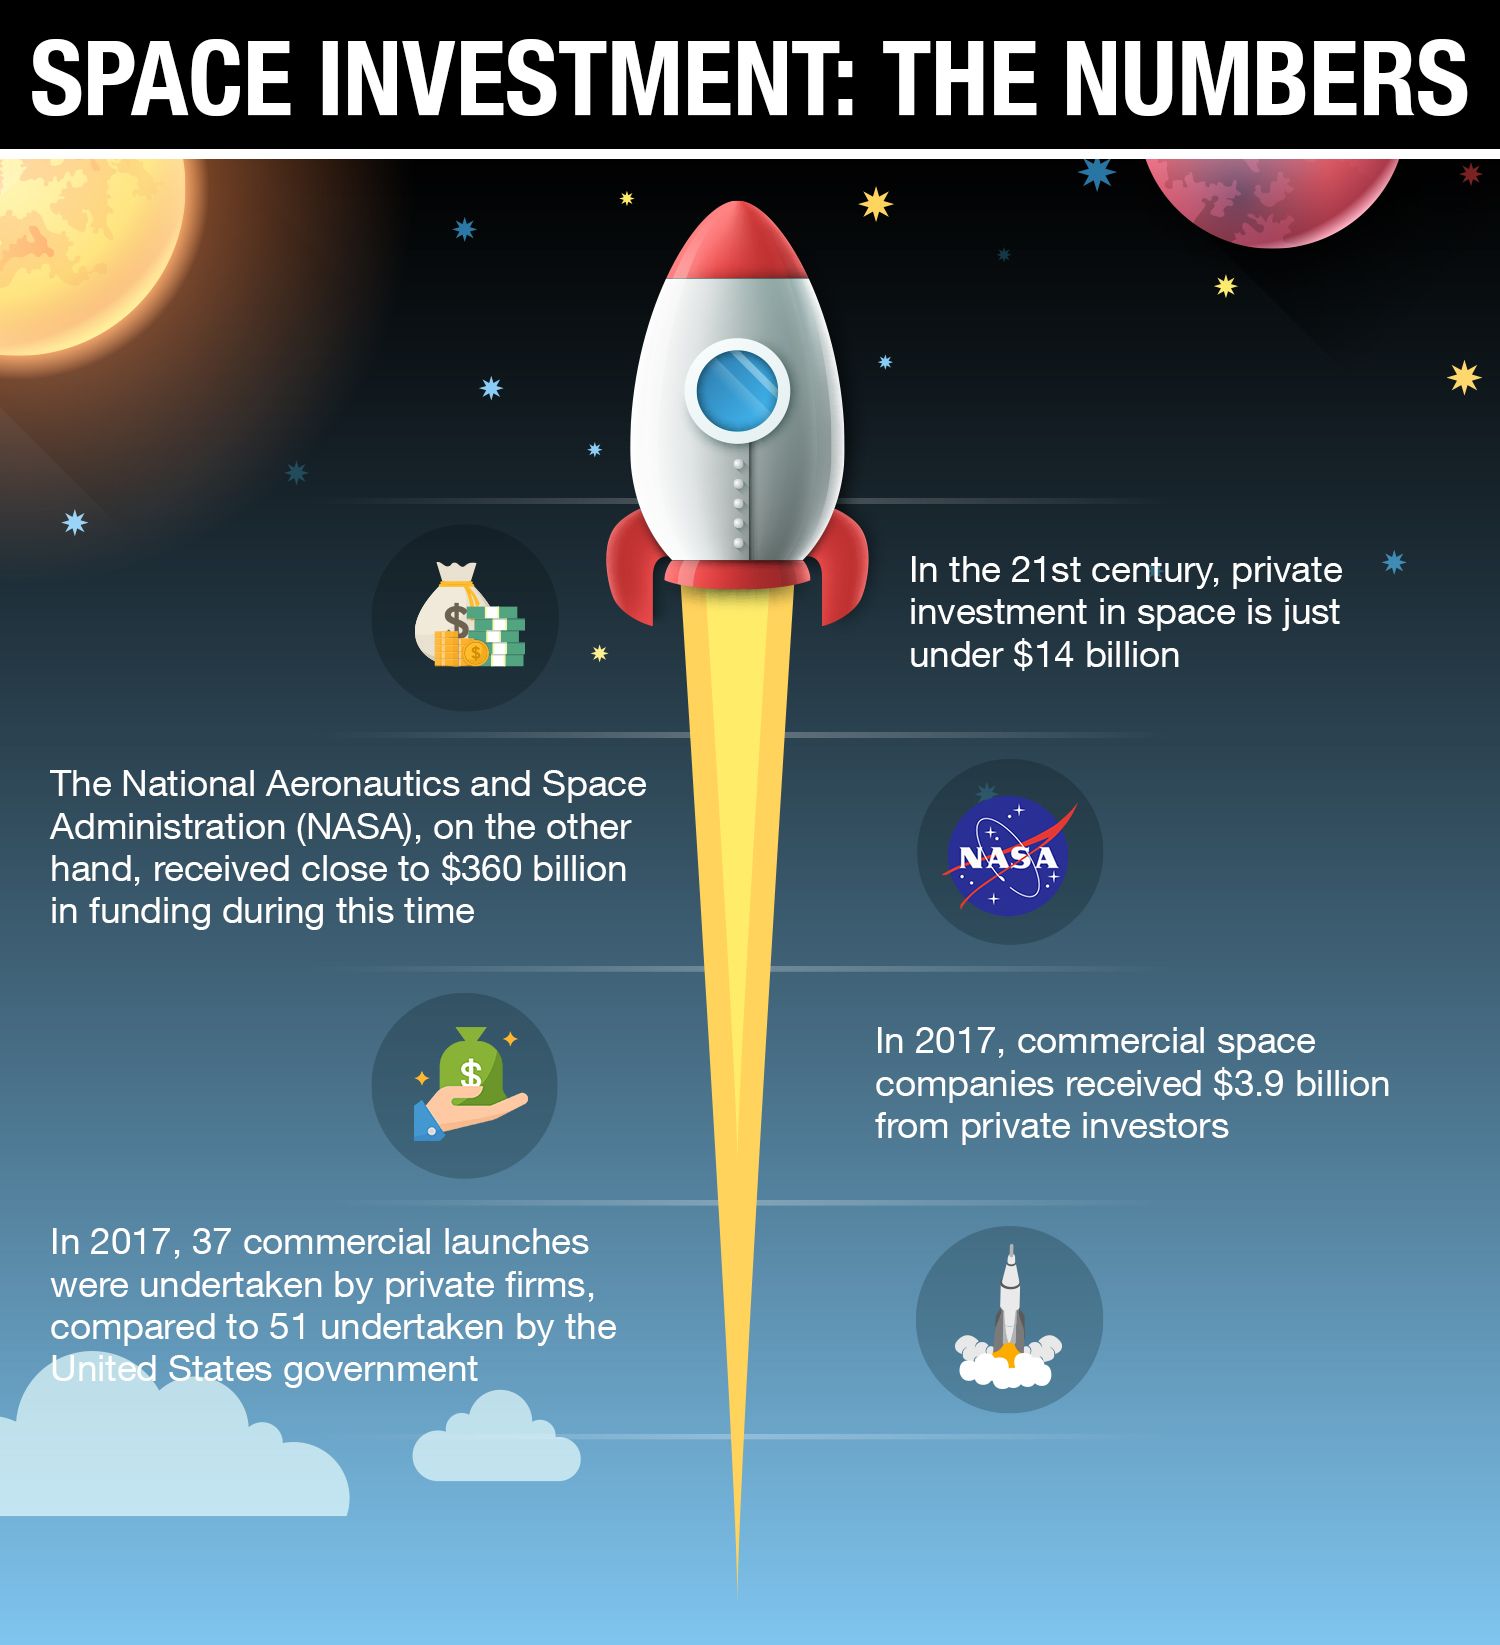 Investing in Space